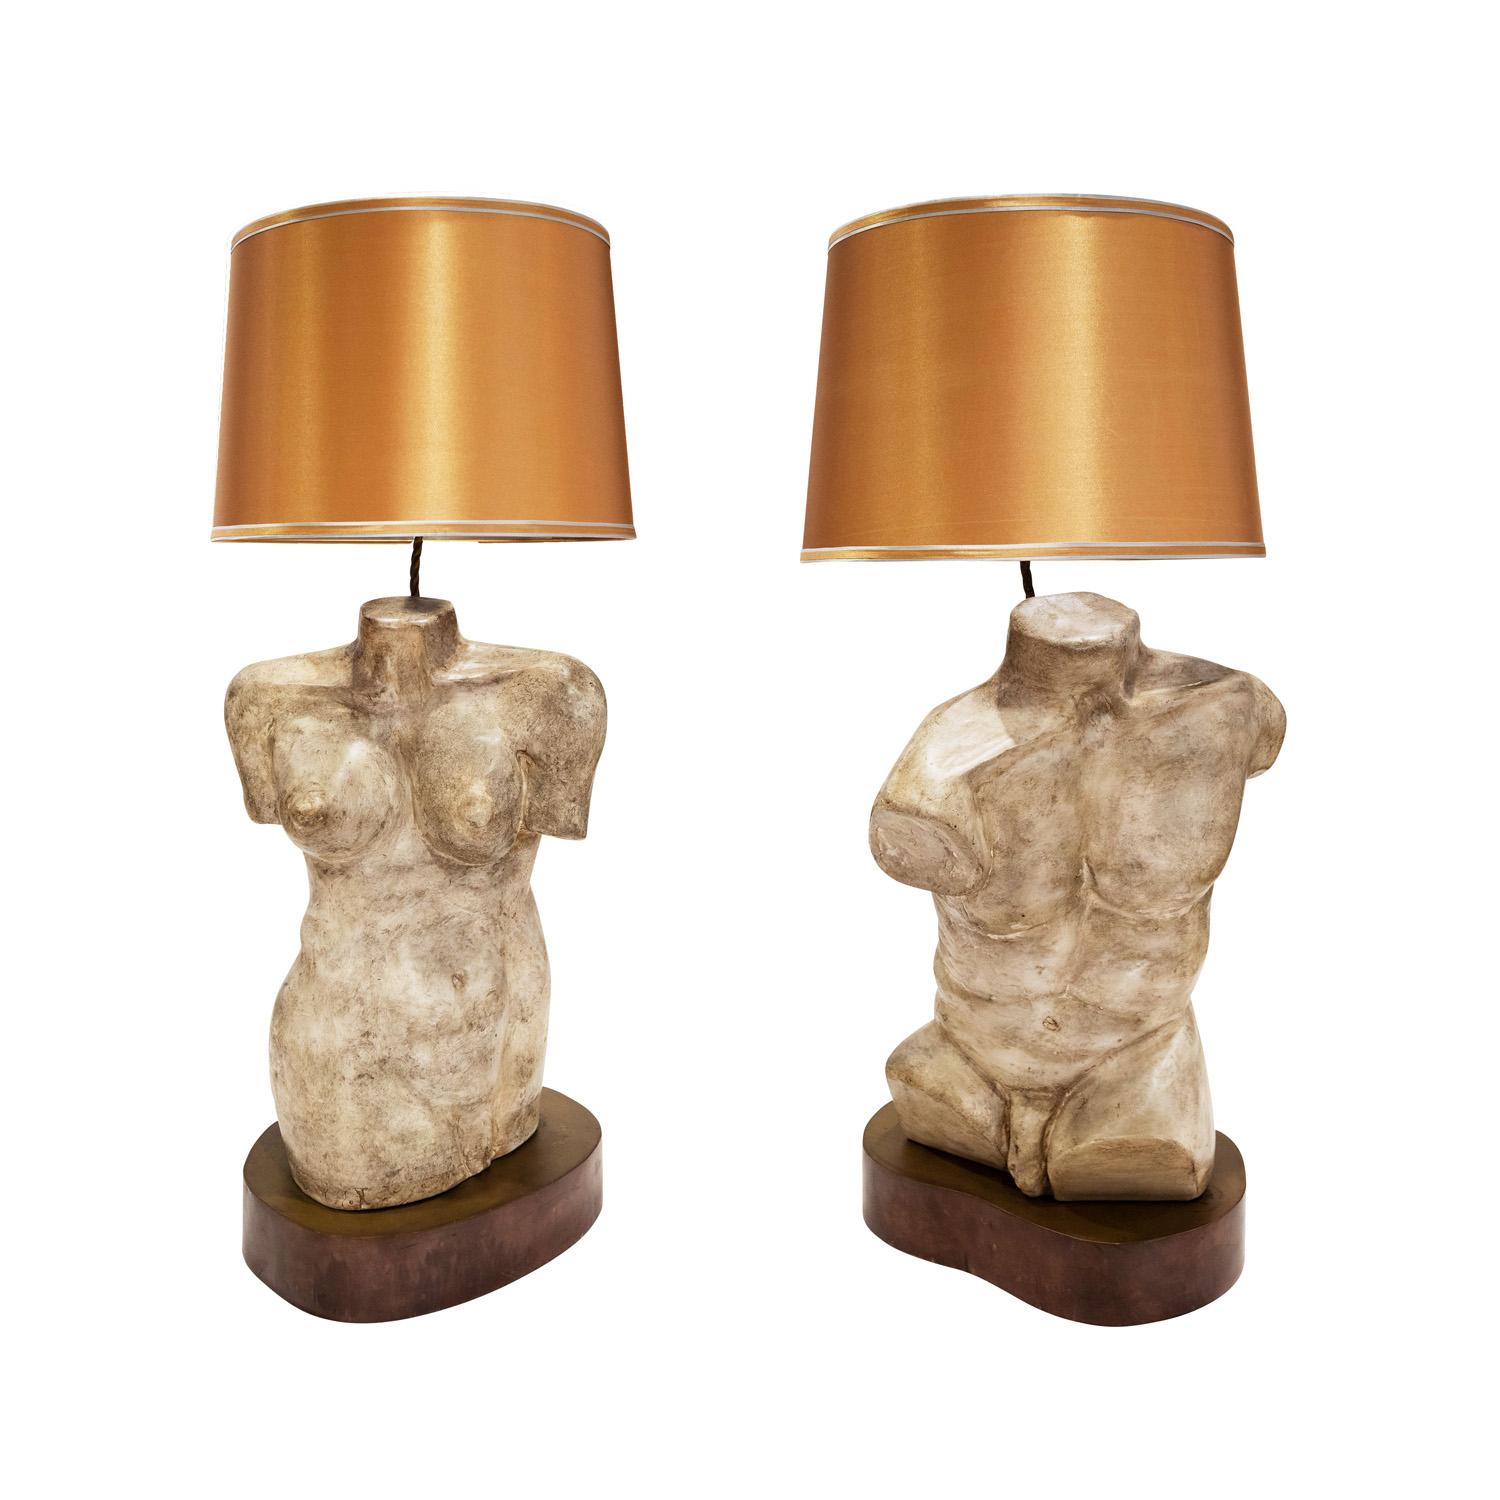 Rare and important “Male and Female Torso” table lamps in Hydro Stone plaster on patinated bronze bases by Philip & Kelvin LaVerne, American 1970's (signed 